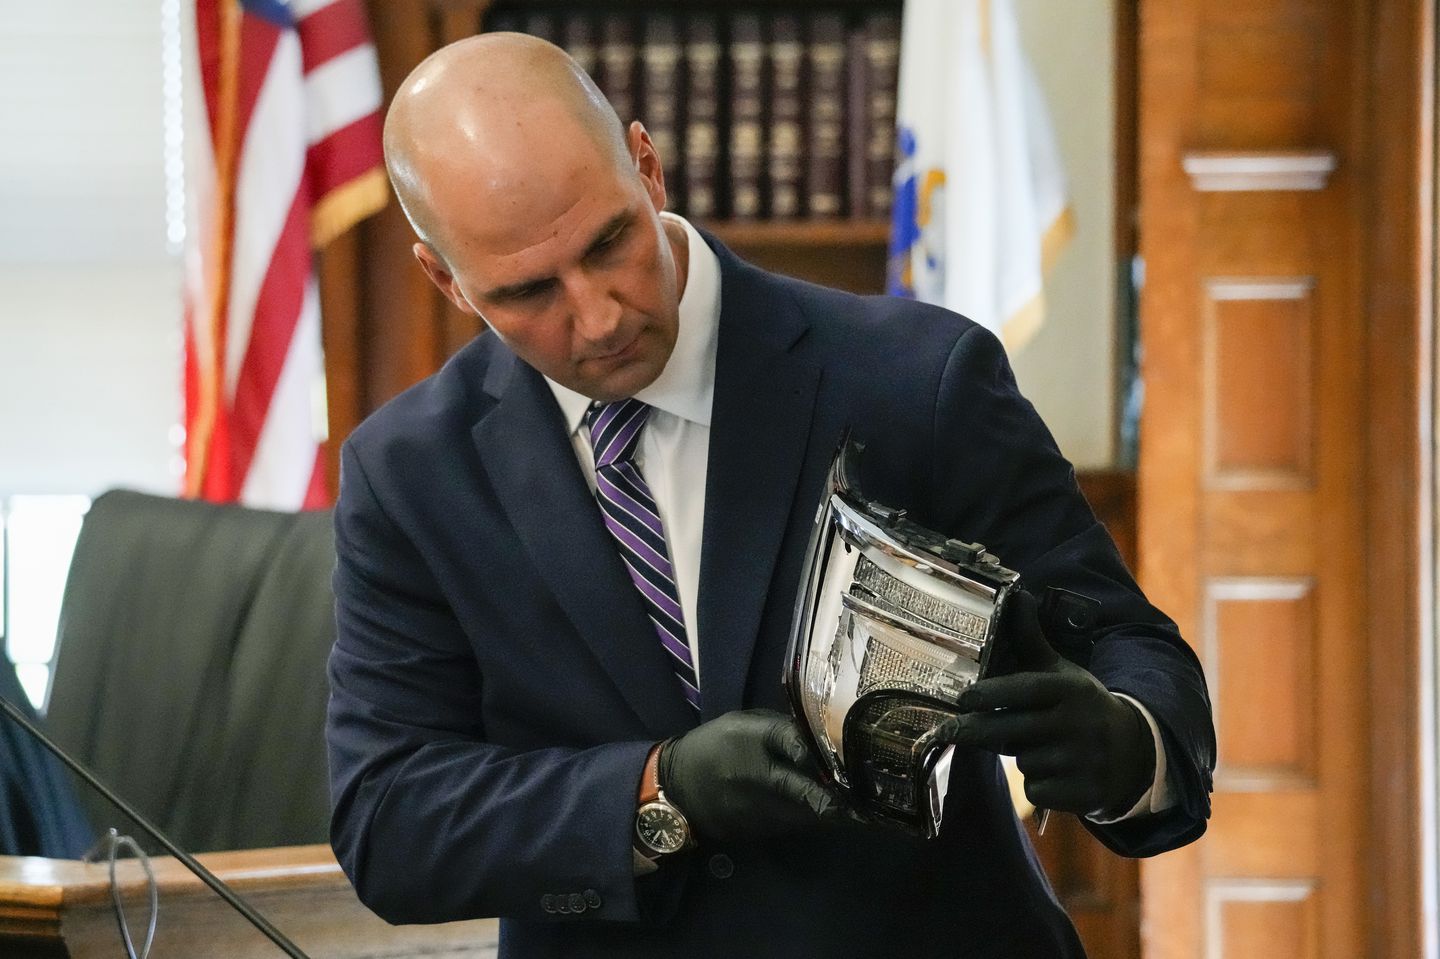 Massachusetts State Police Trooper Michael Proctor showed the jury a broken taillight while testifying on Monday at Norfolk Superior Court in Dedham, during the murder trial of Karen Read.